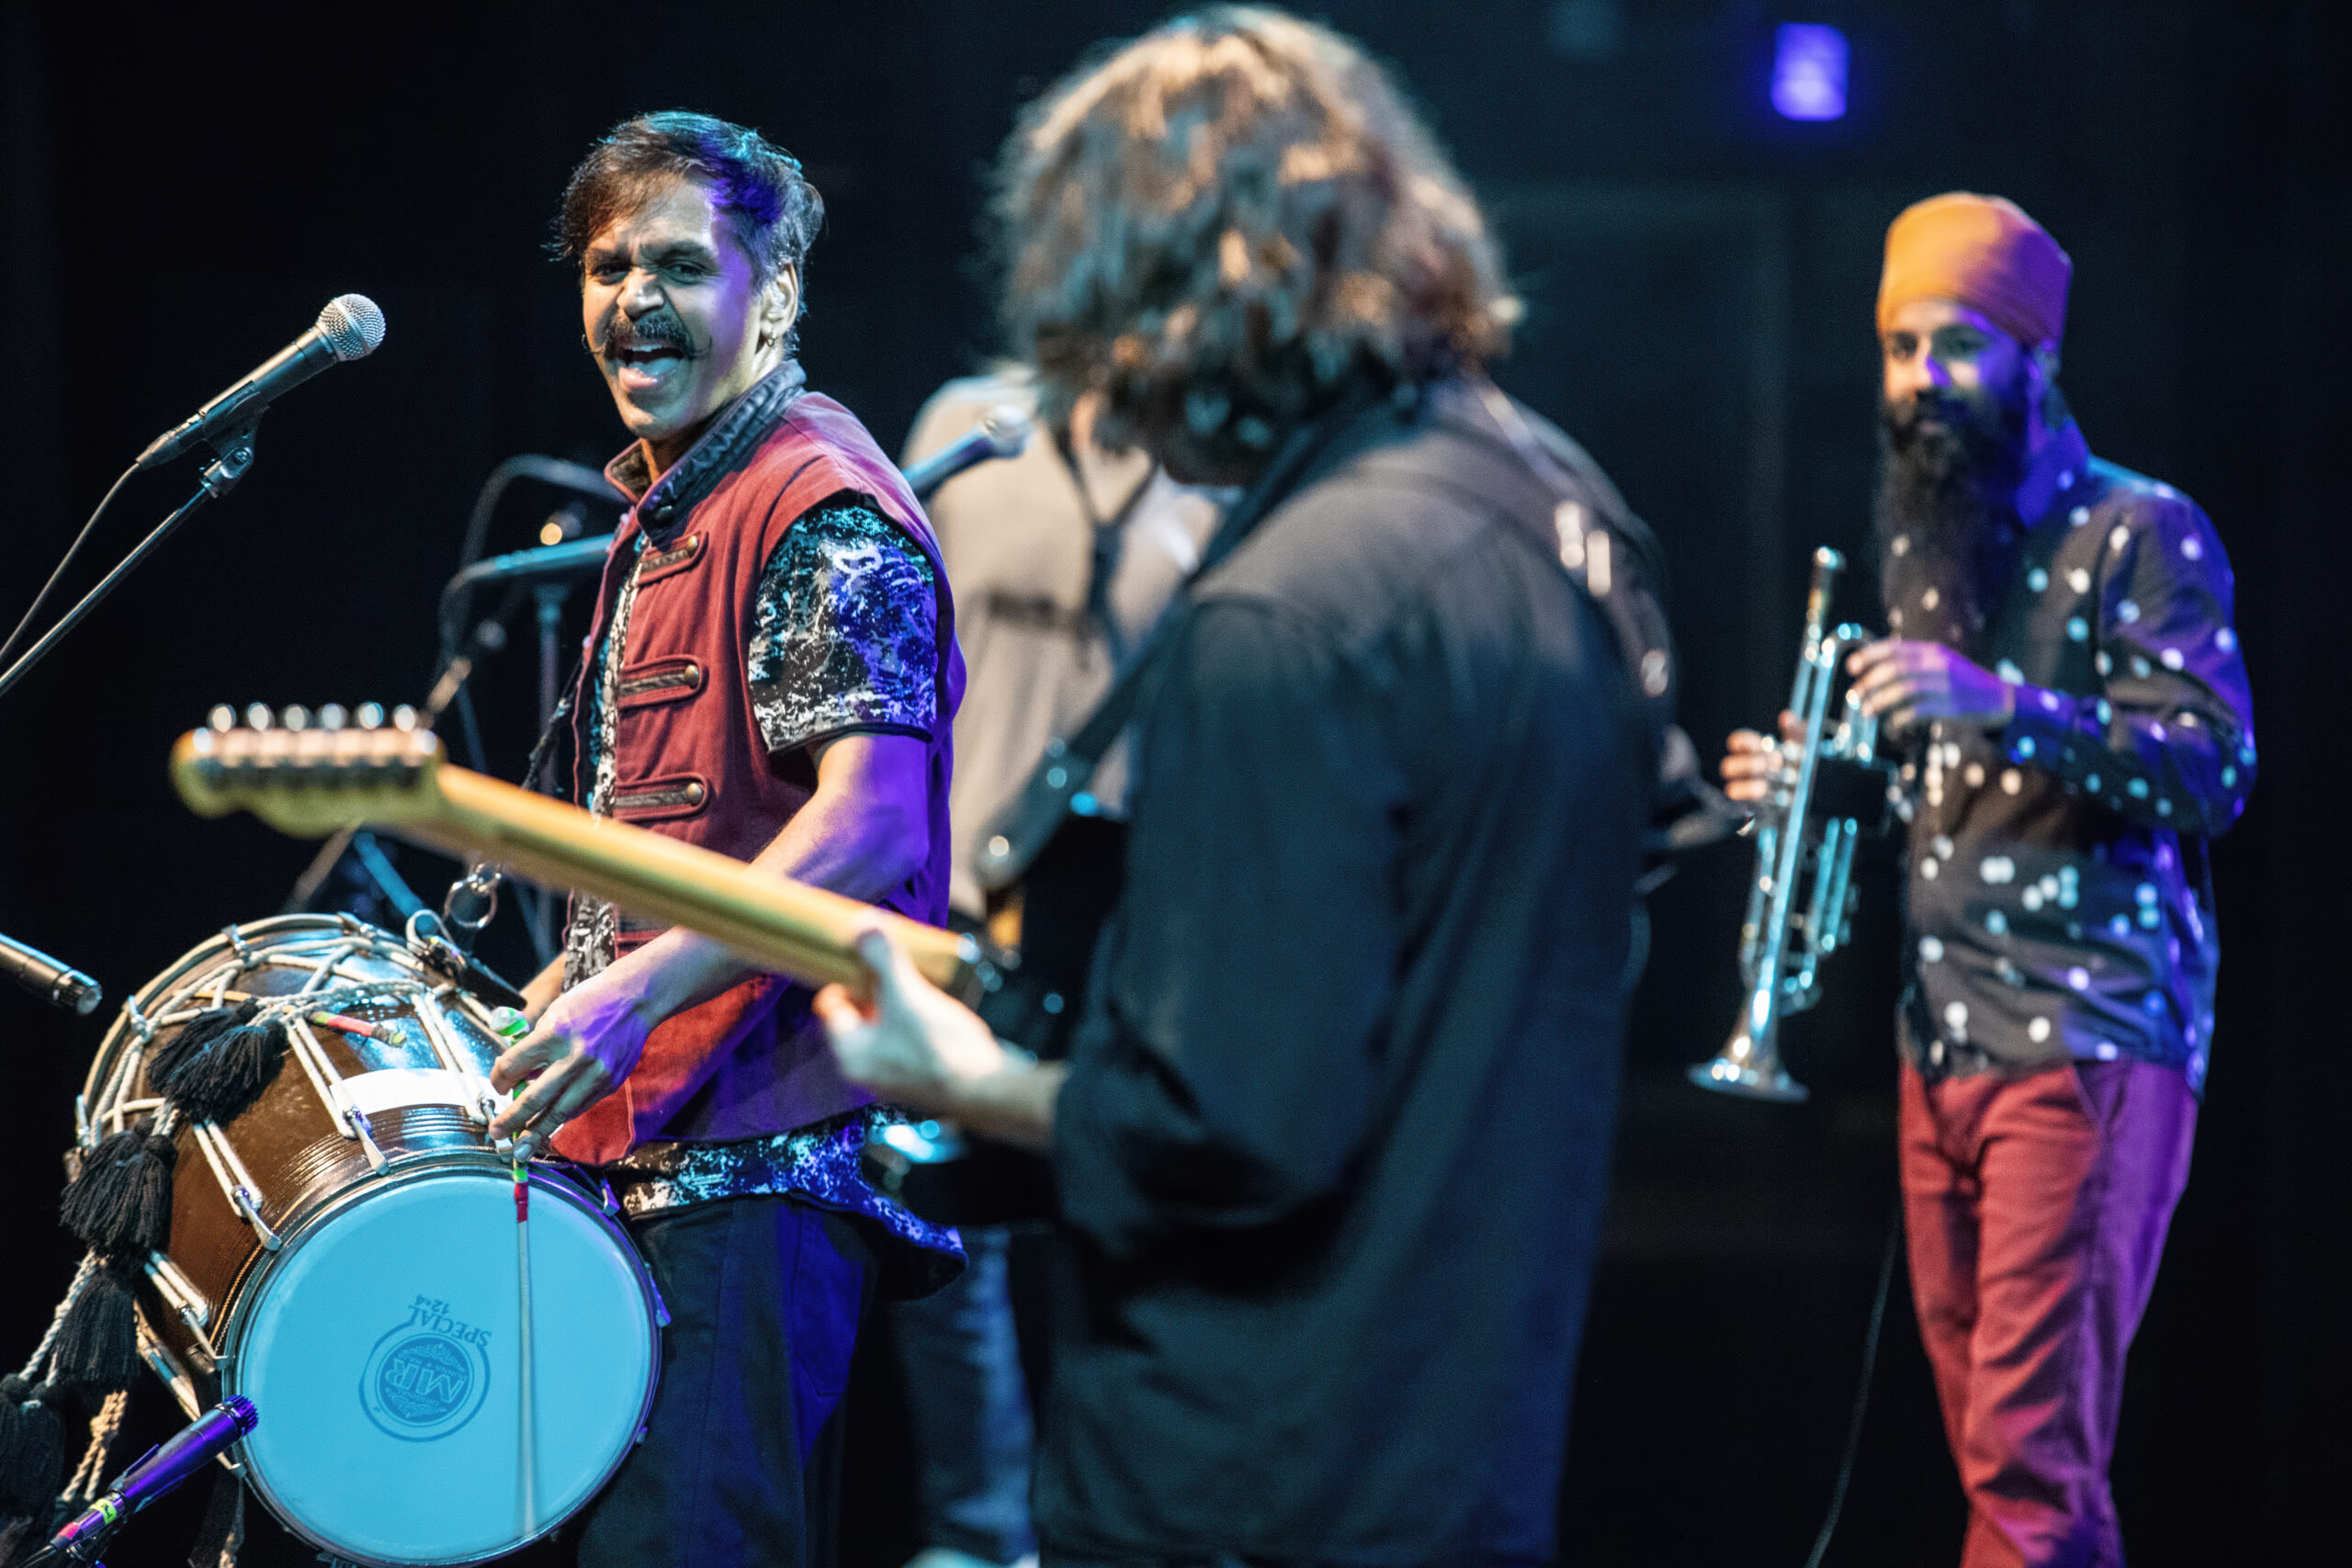 Friday, October 26 — Red Baraat concert at Miller Outdoor Theatre, presented by Asia Society Texas Center.